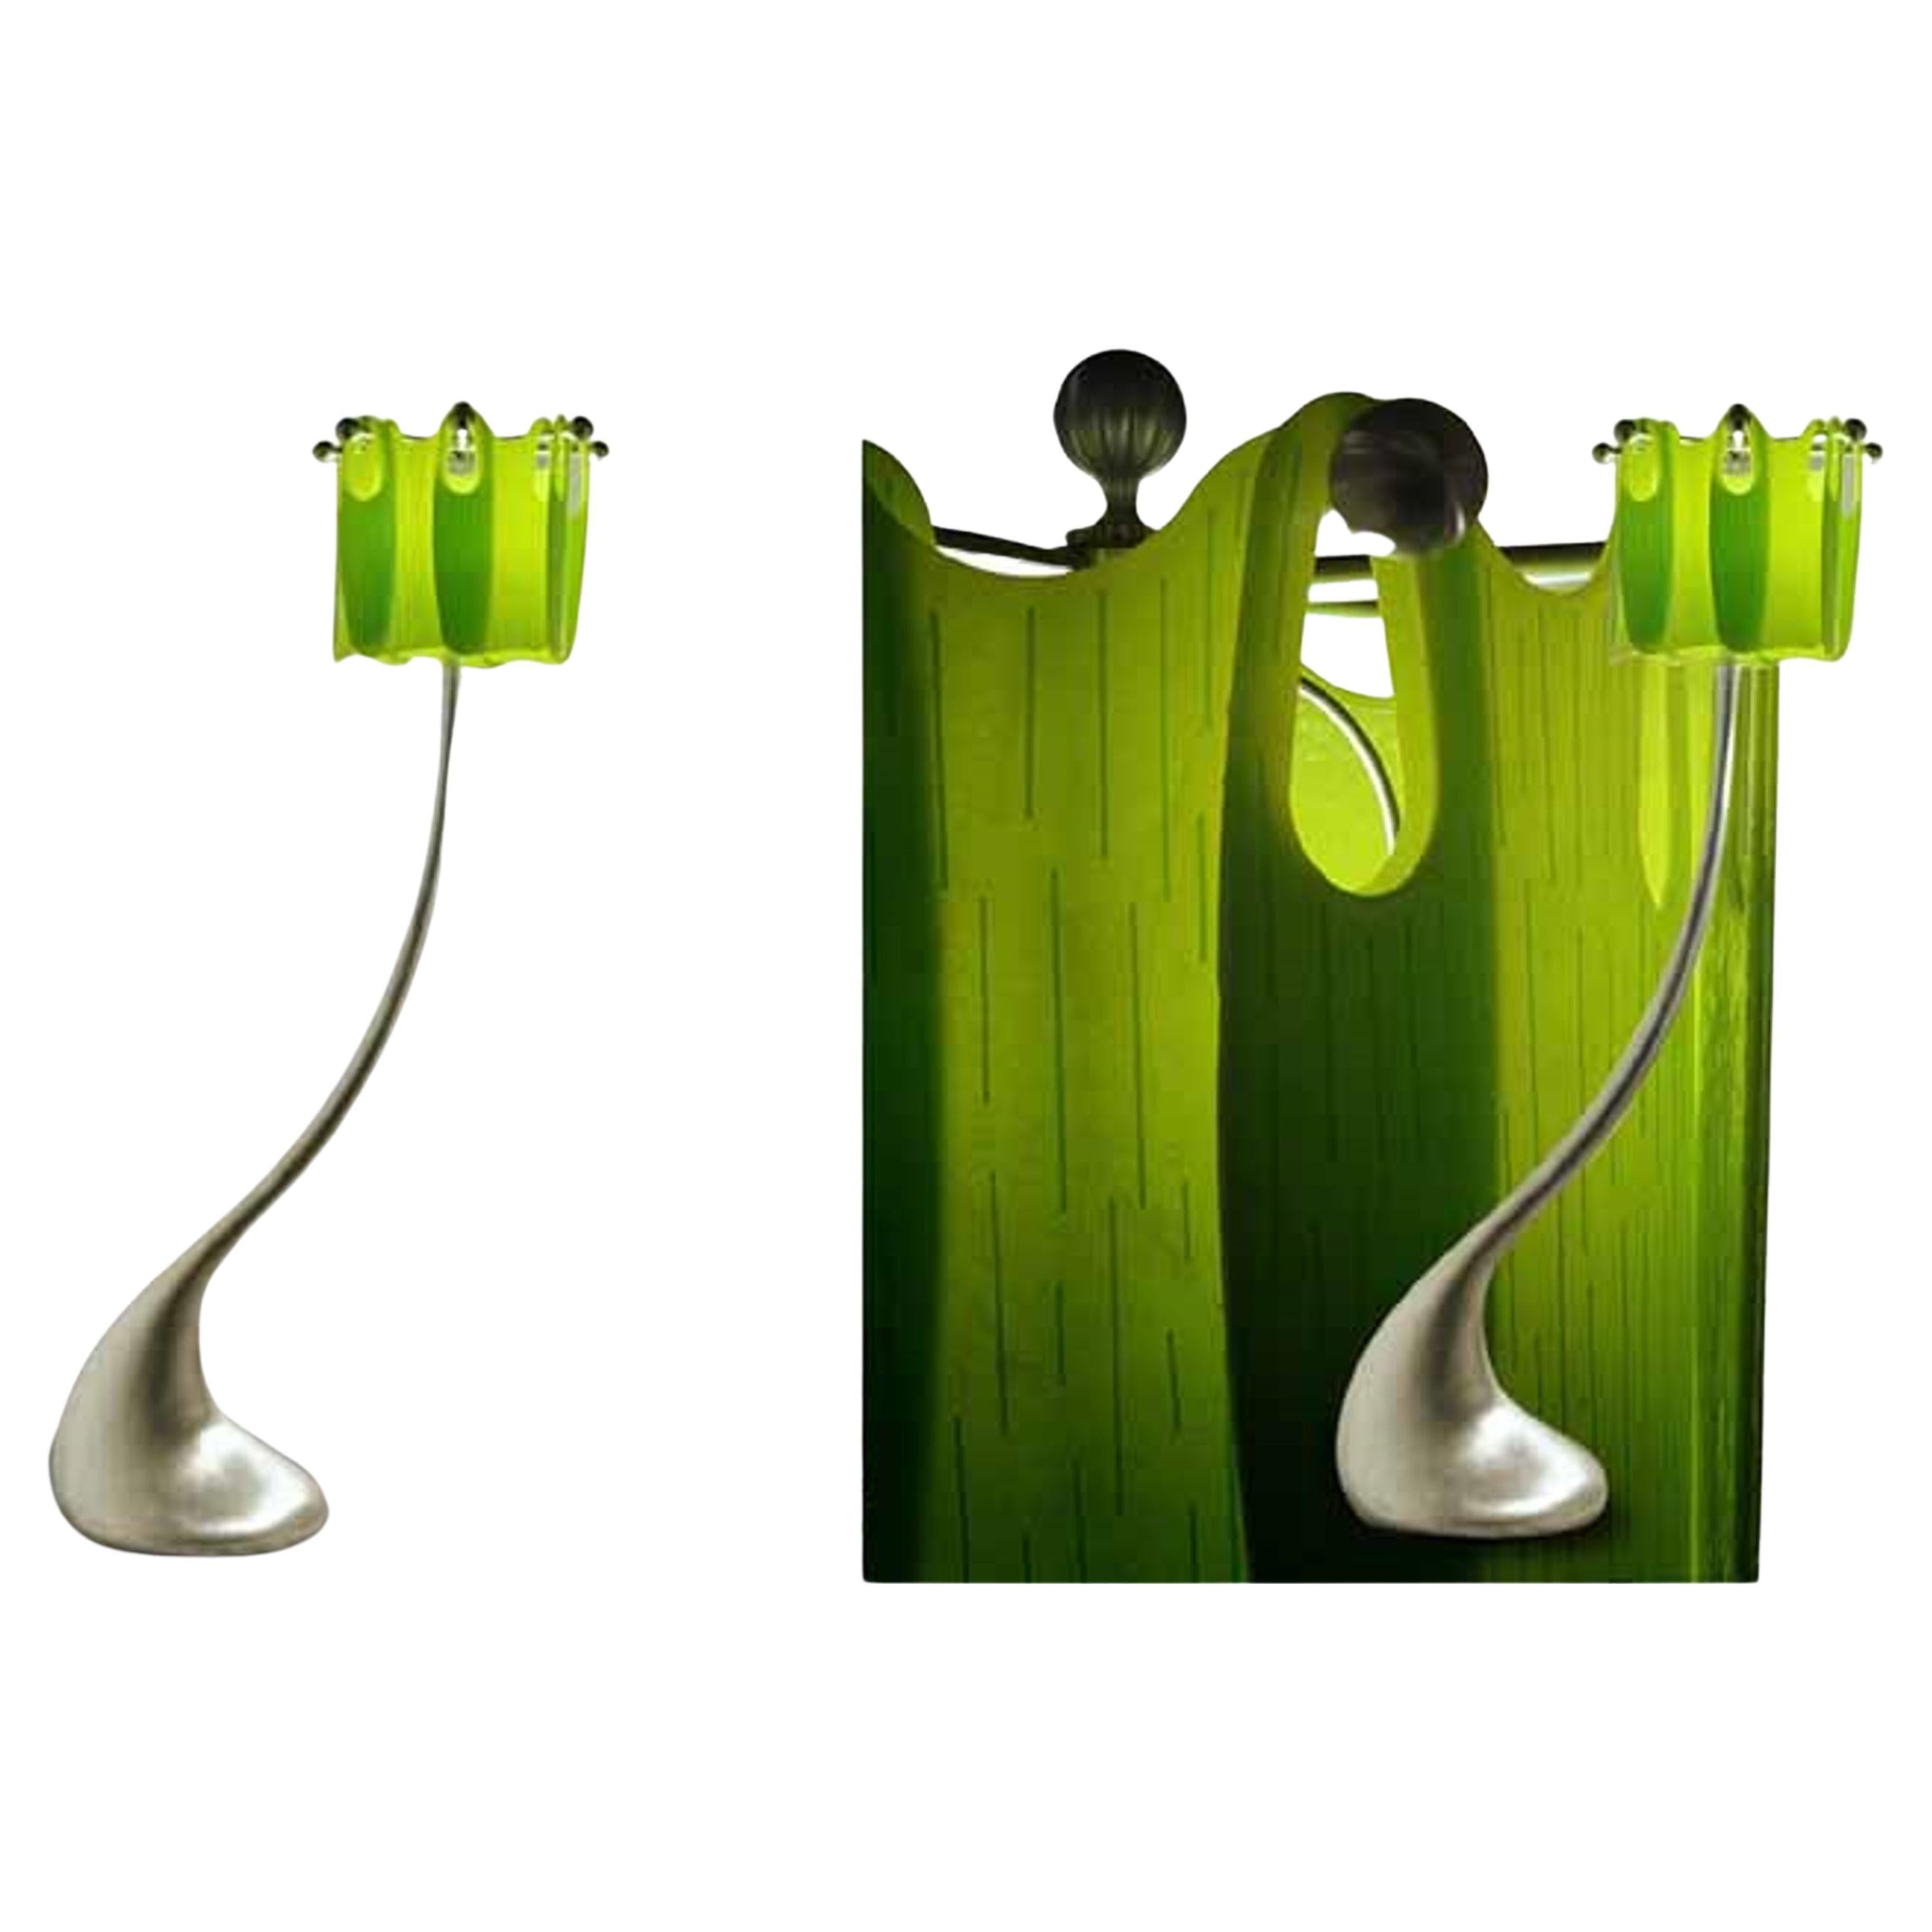 ANNA-MAE Cast Aluminum and Fused Glass Organic Floor Lamp by Jordan Mozer For Sale